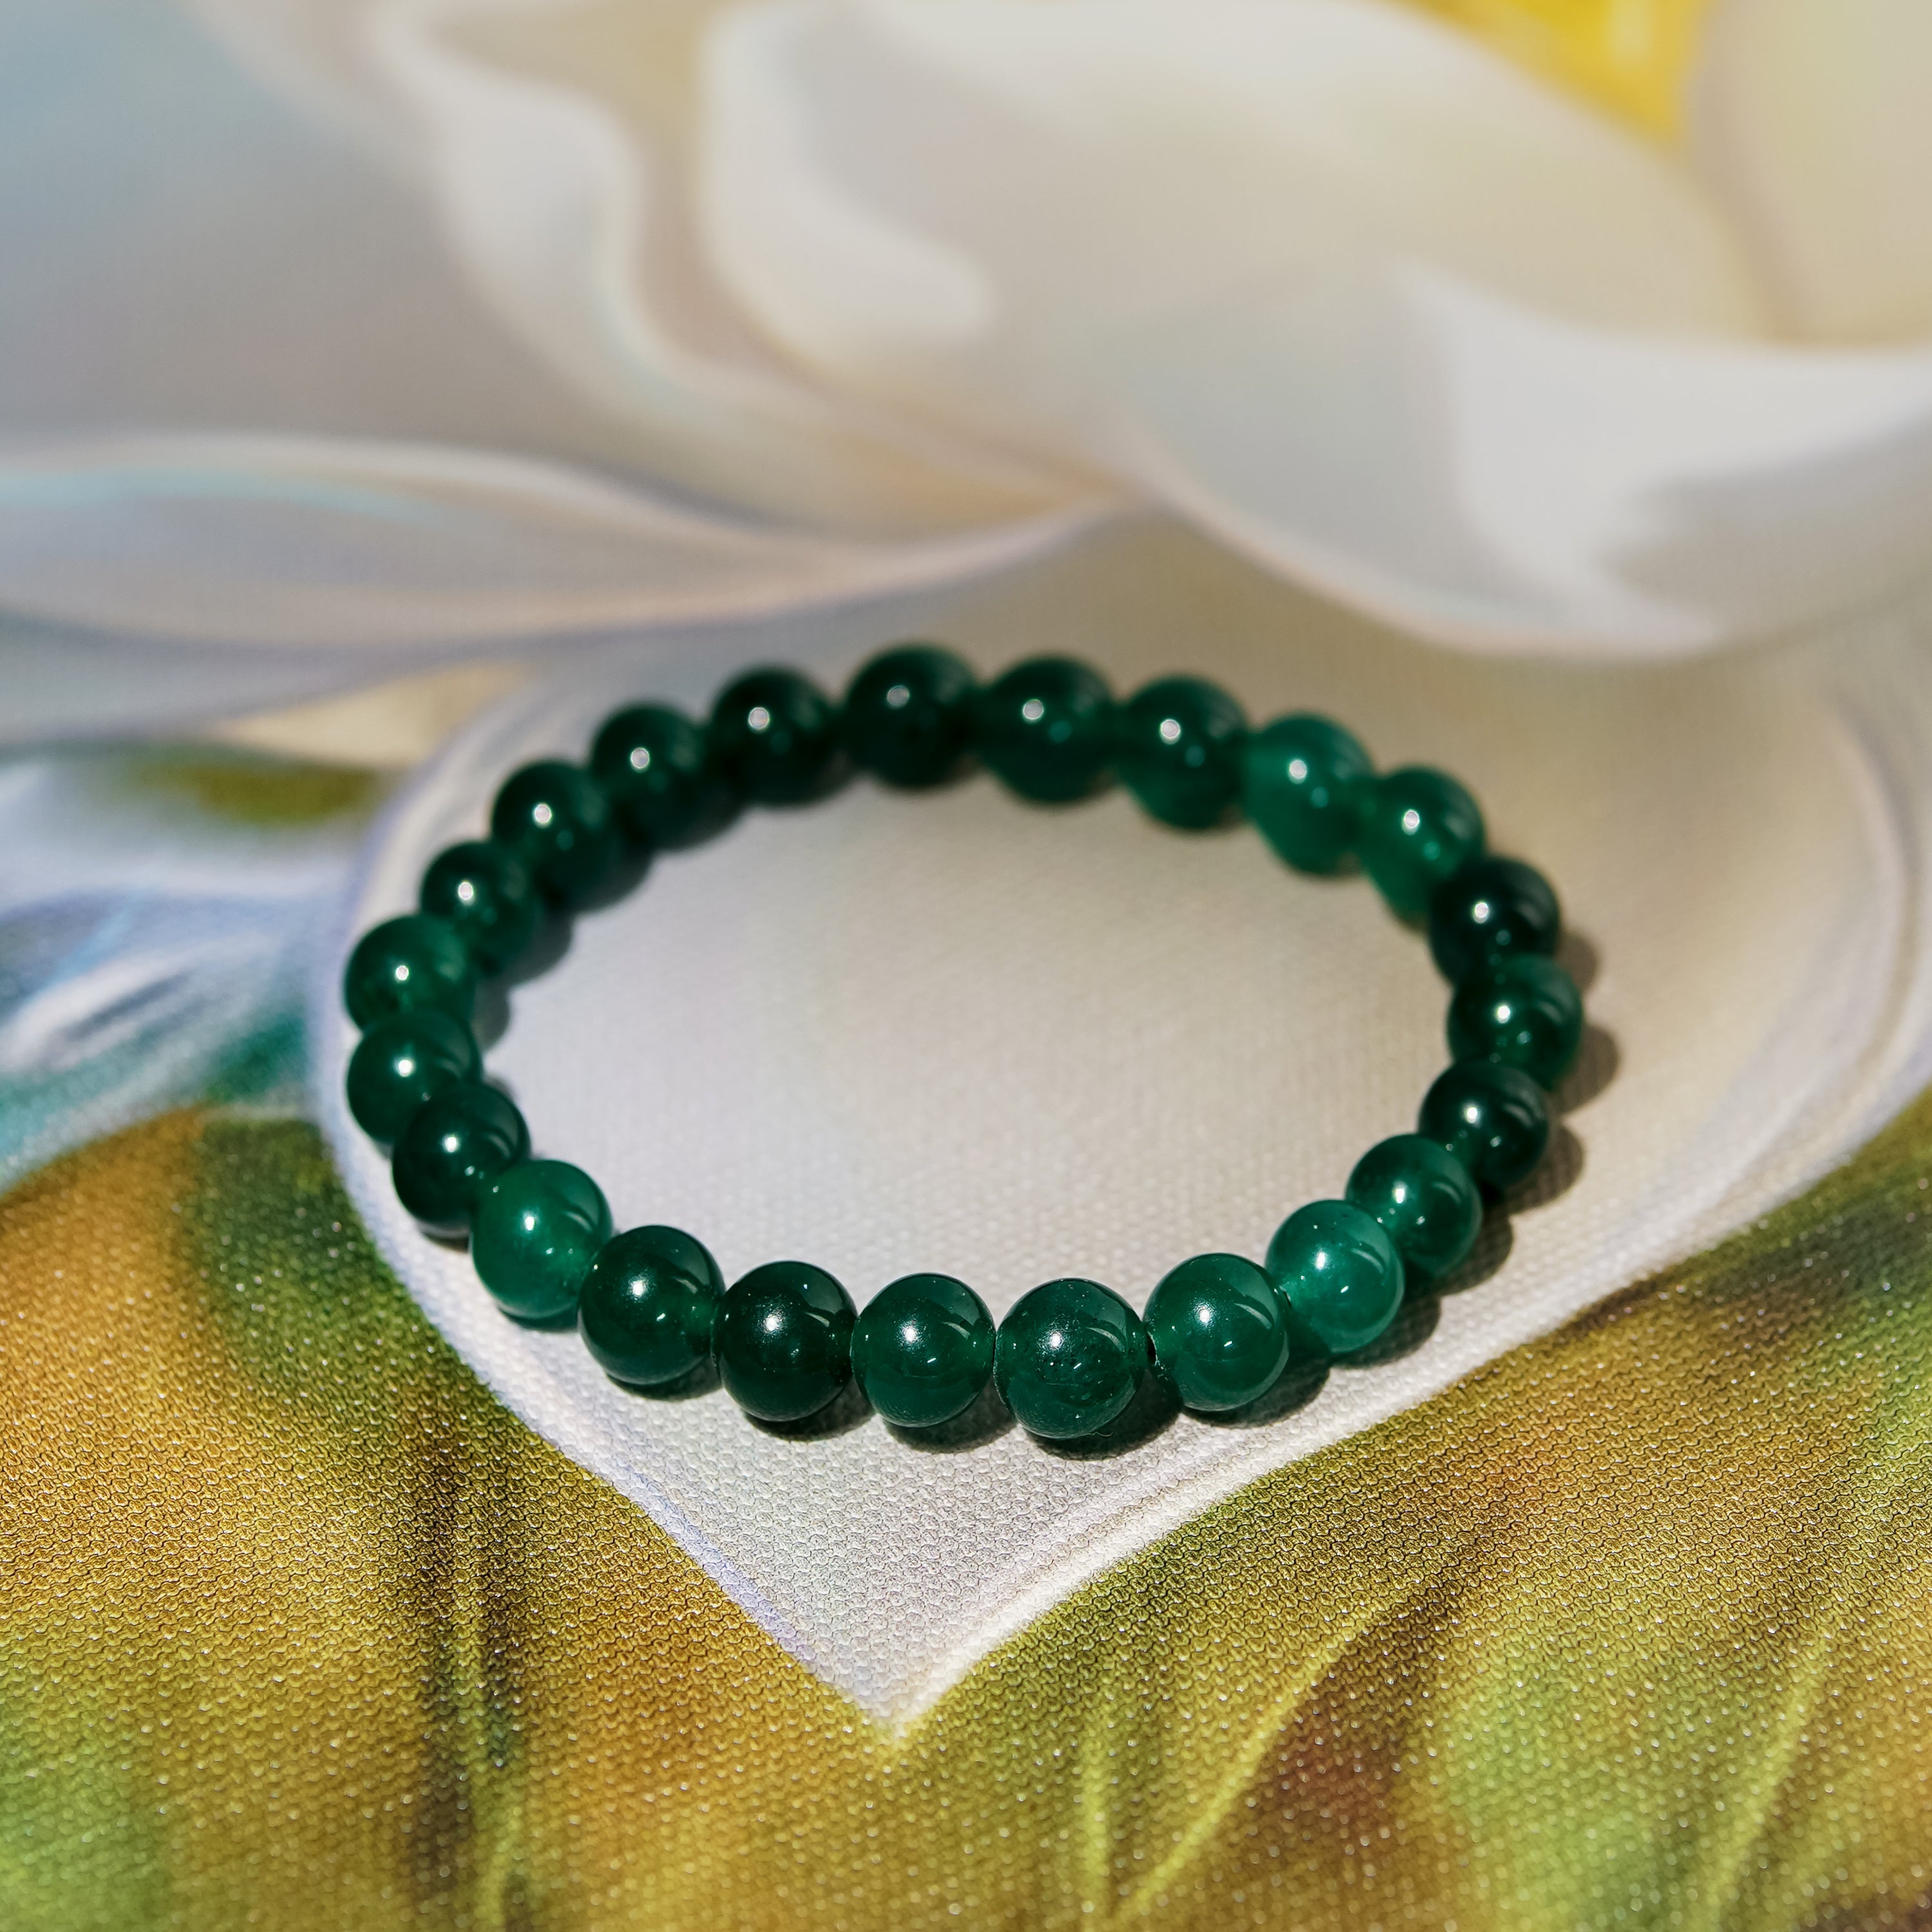 HSUMING Jade Bangle Bracelet for Women Retro Chinese Style Natural Green  Jade Bangle (2.08-2.56In) G001,64mm : Amazon.in: Jewellery